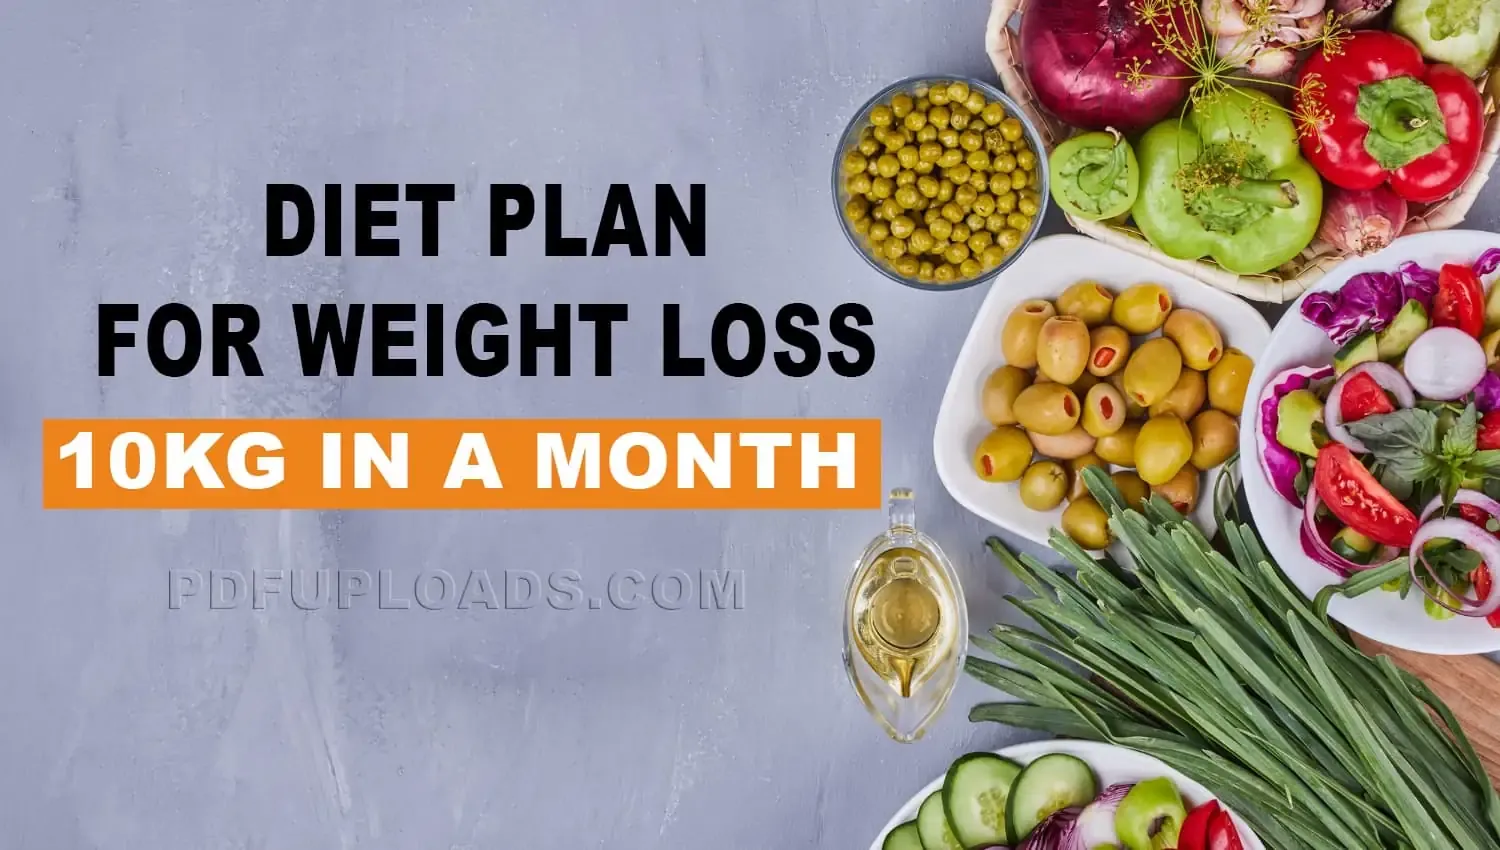 Hindi Diet Plan for Weight Loss 10kg in a Month PDF